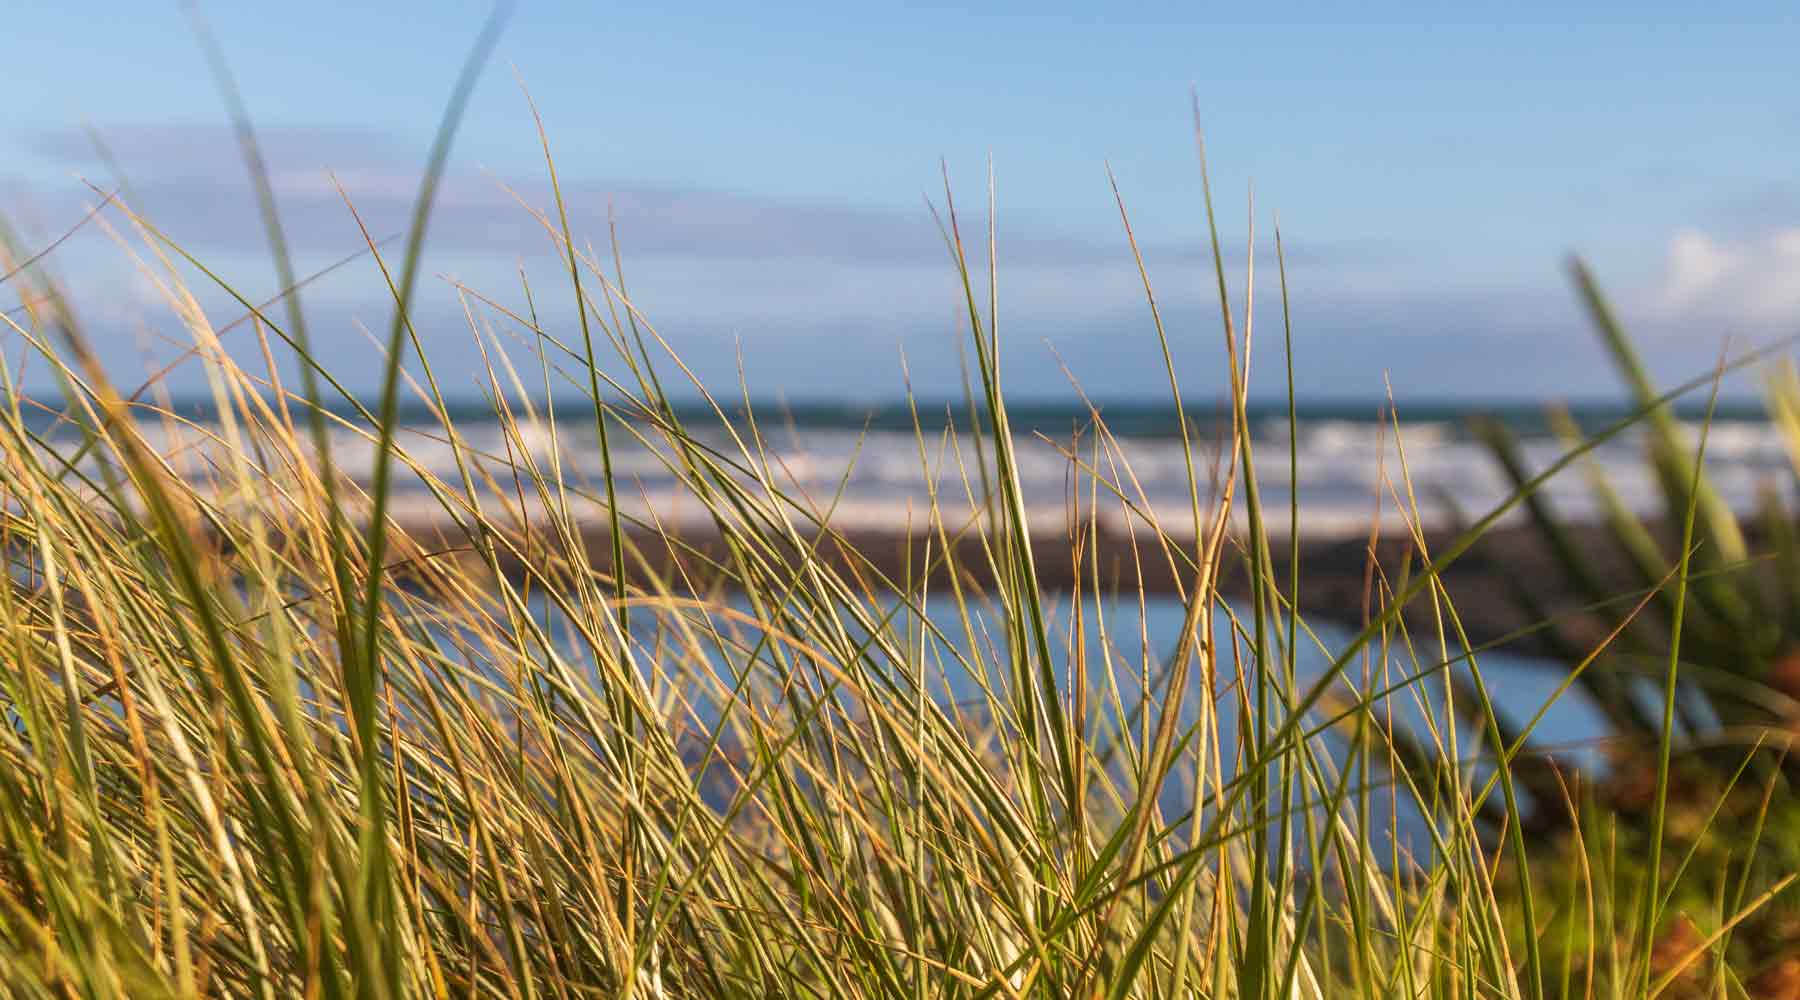 Foreground are grasses in the sand dunes with sun on them and in the background is the black sand beach and the surf